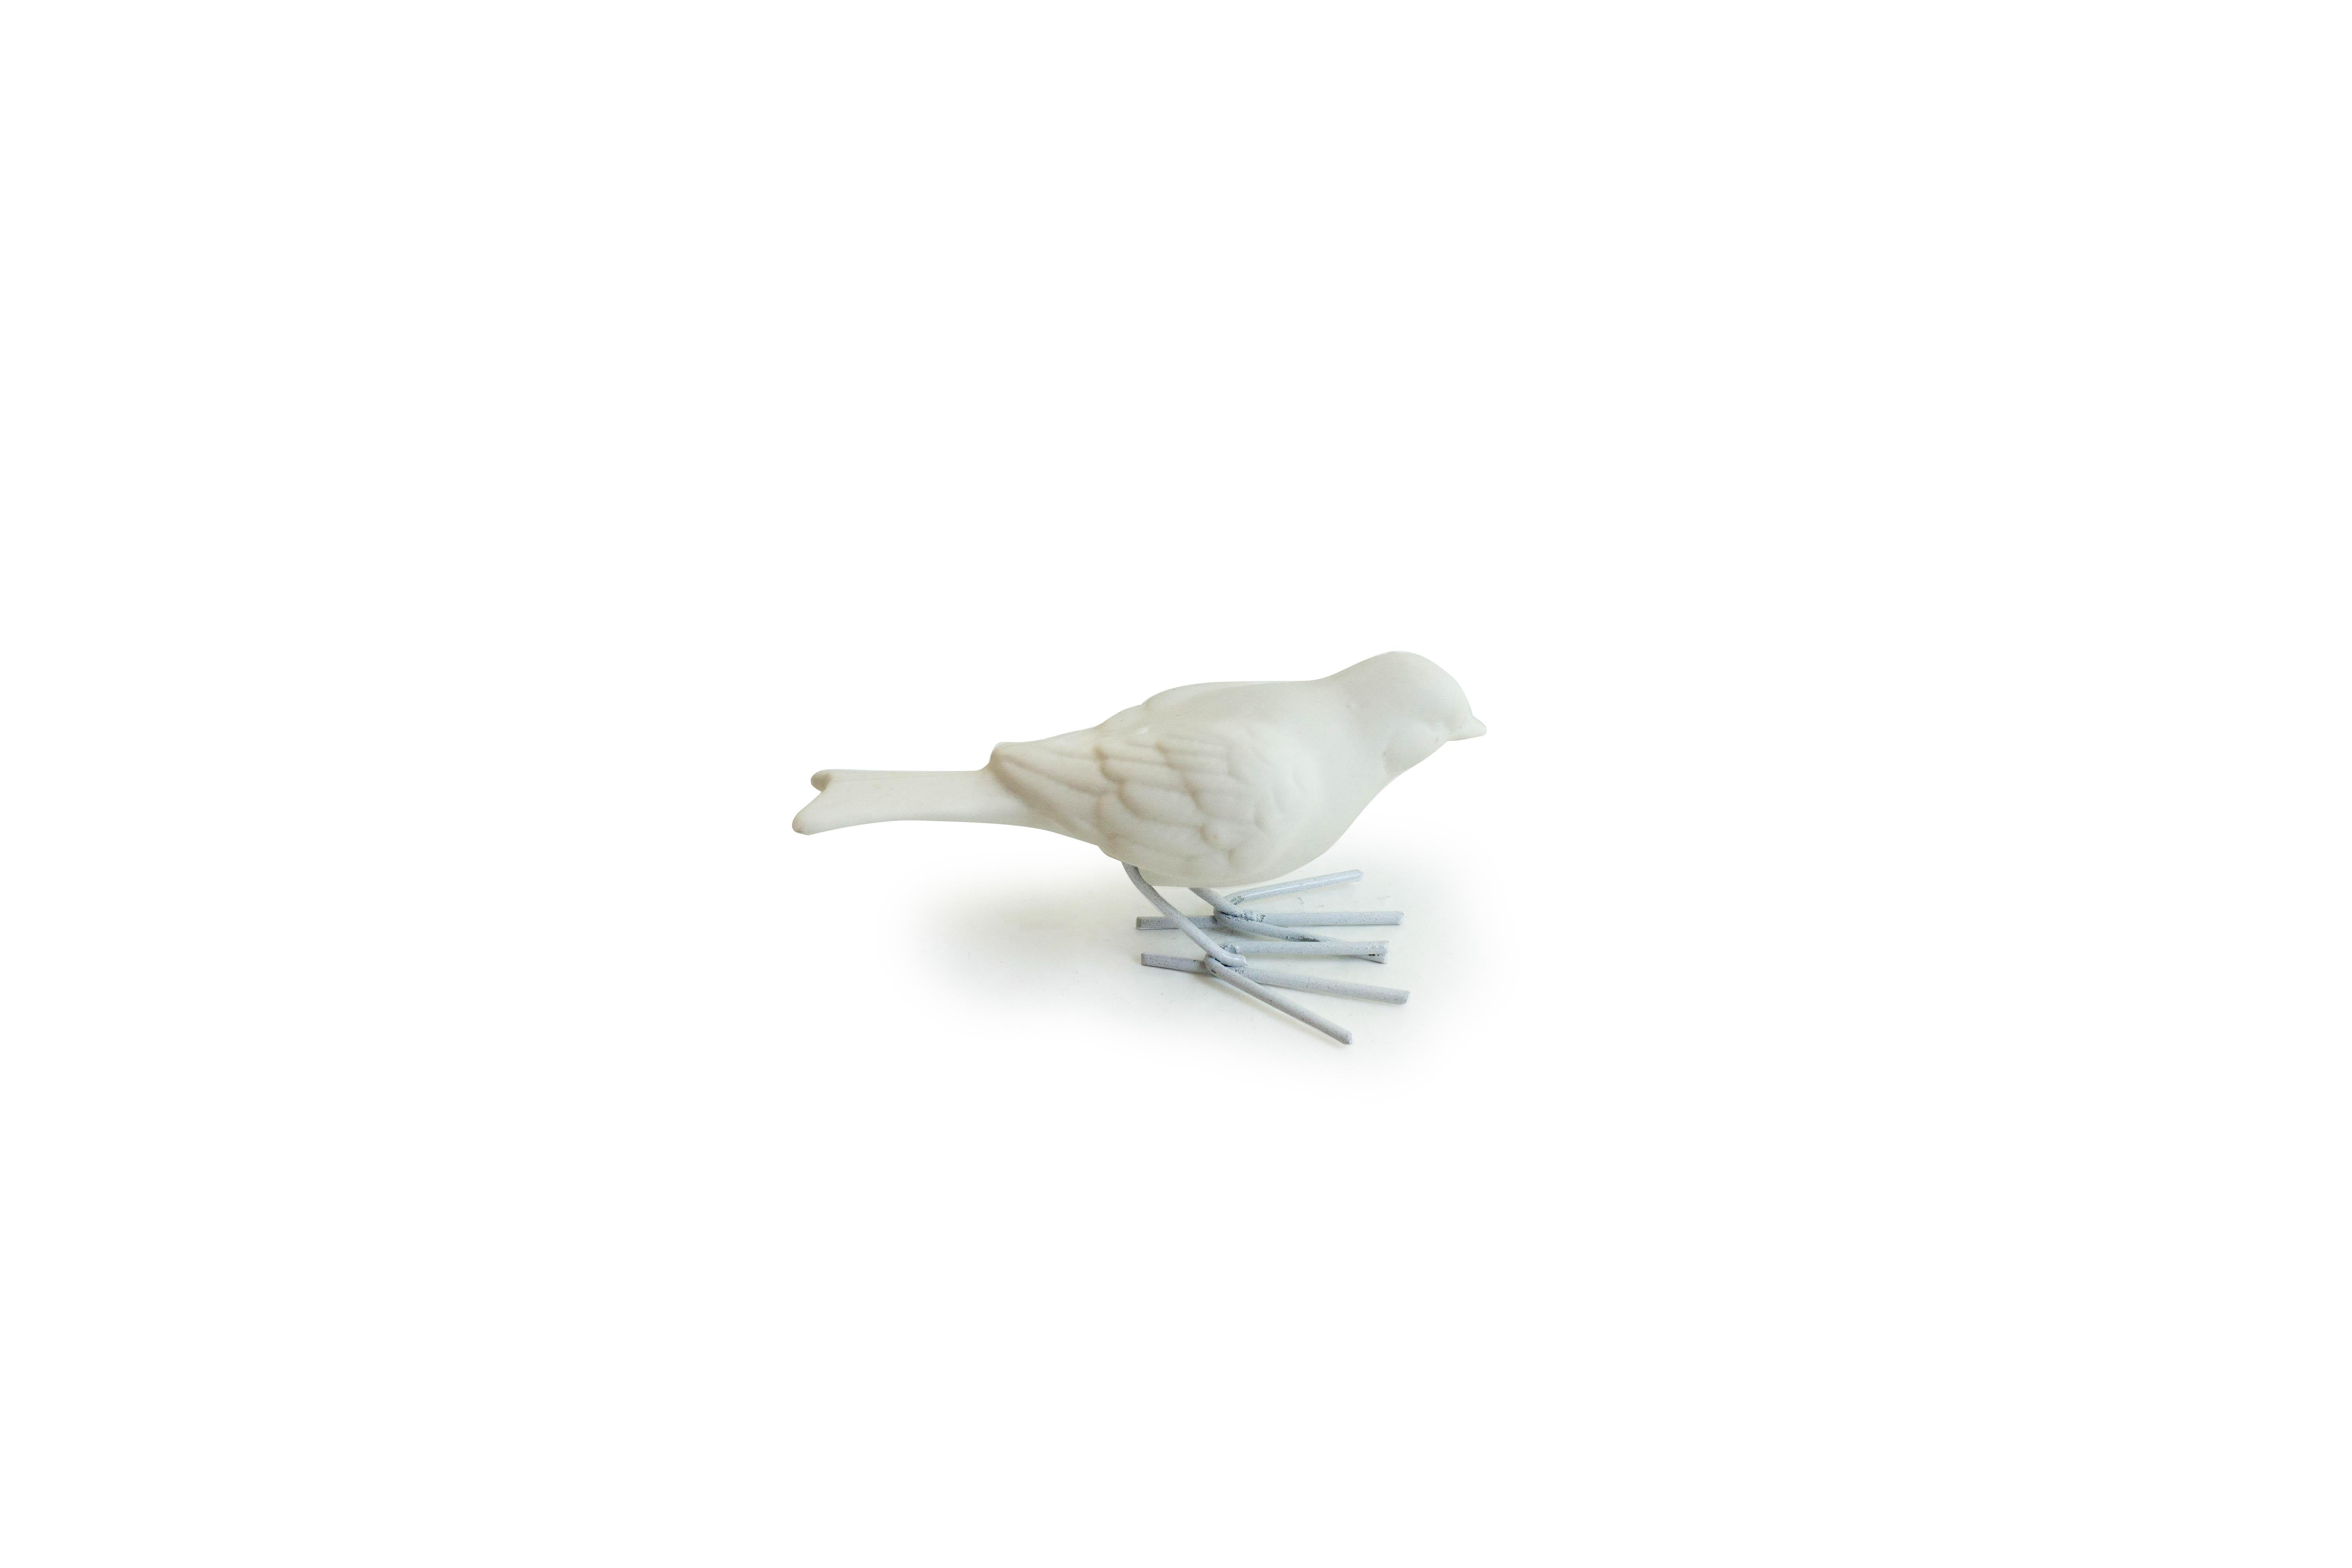 Set of 4 Unglazed White Porcelain Birds, Starlings supported by White Iron Legs  For Sale 5